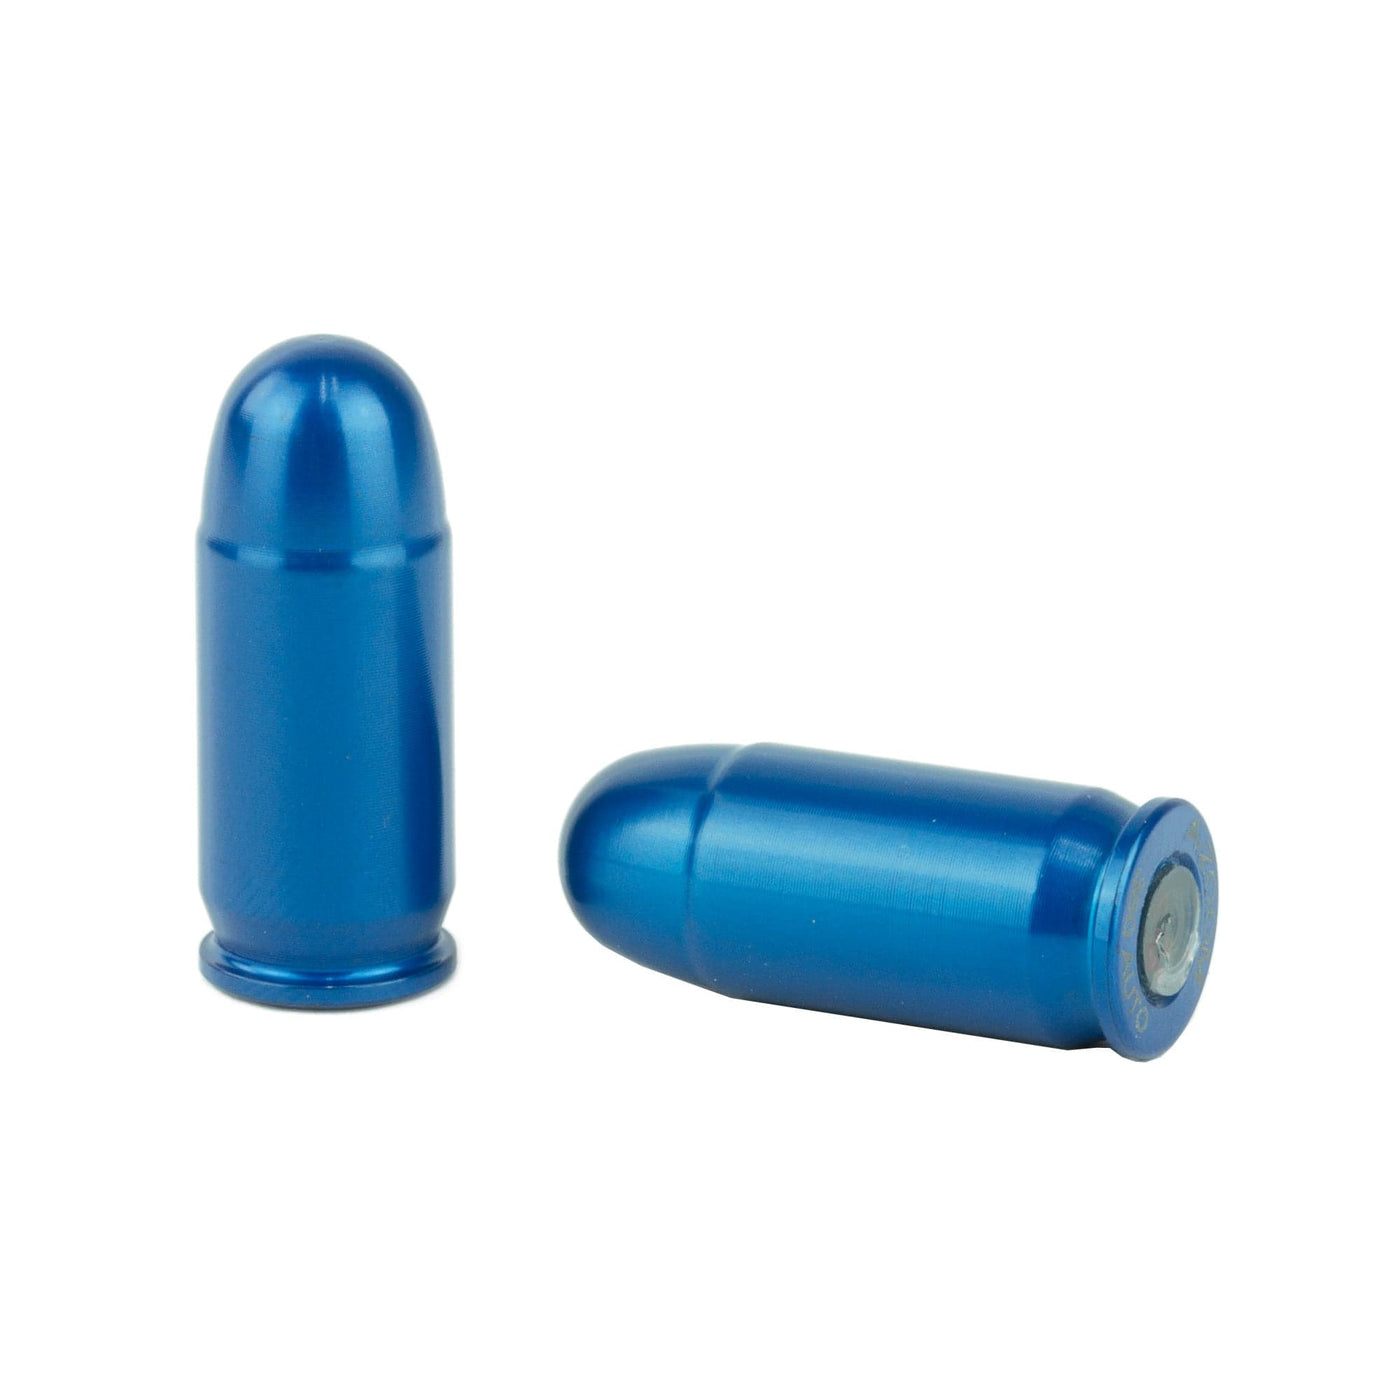 A-Zoom A-zoom Metal Snap Cap Blue - .380acp 10-pack Ammo